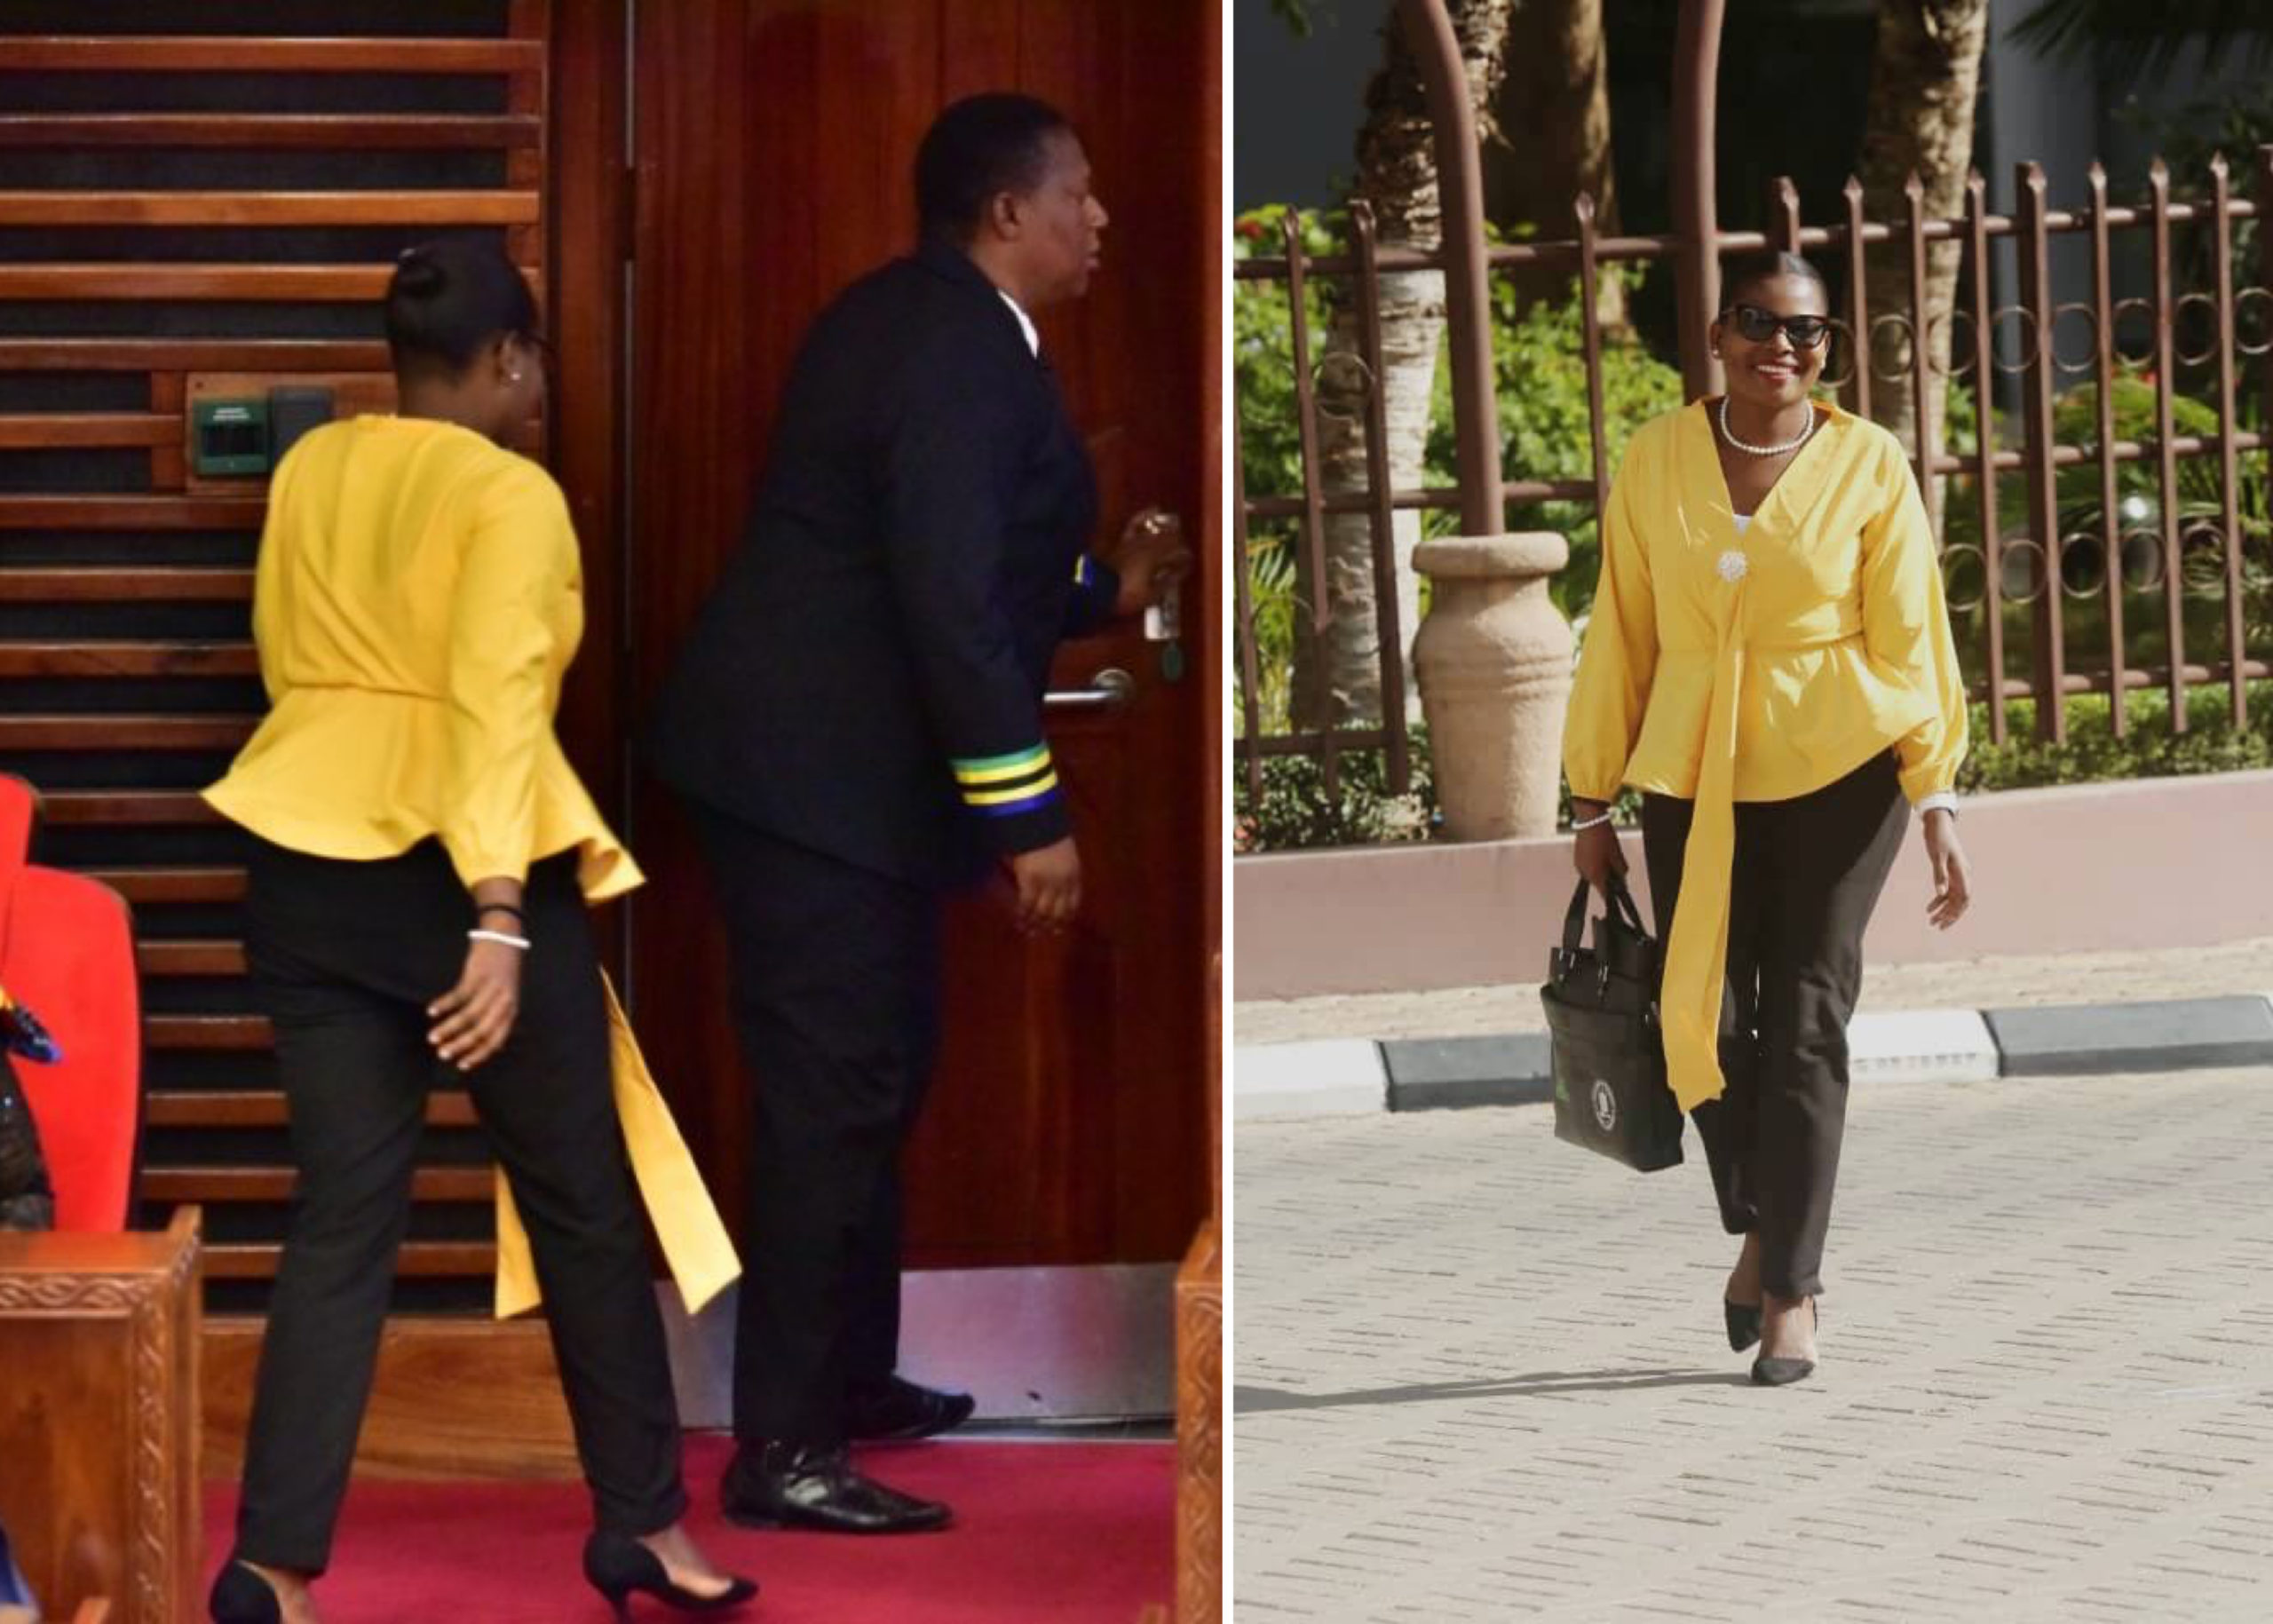 Tanzania Female MP Ejected From Parliament For Wearing ‘Non-Parliamentary Attire’